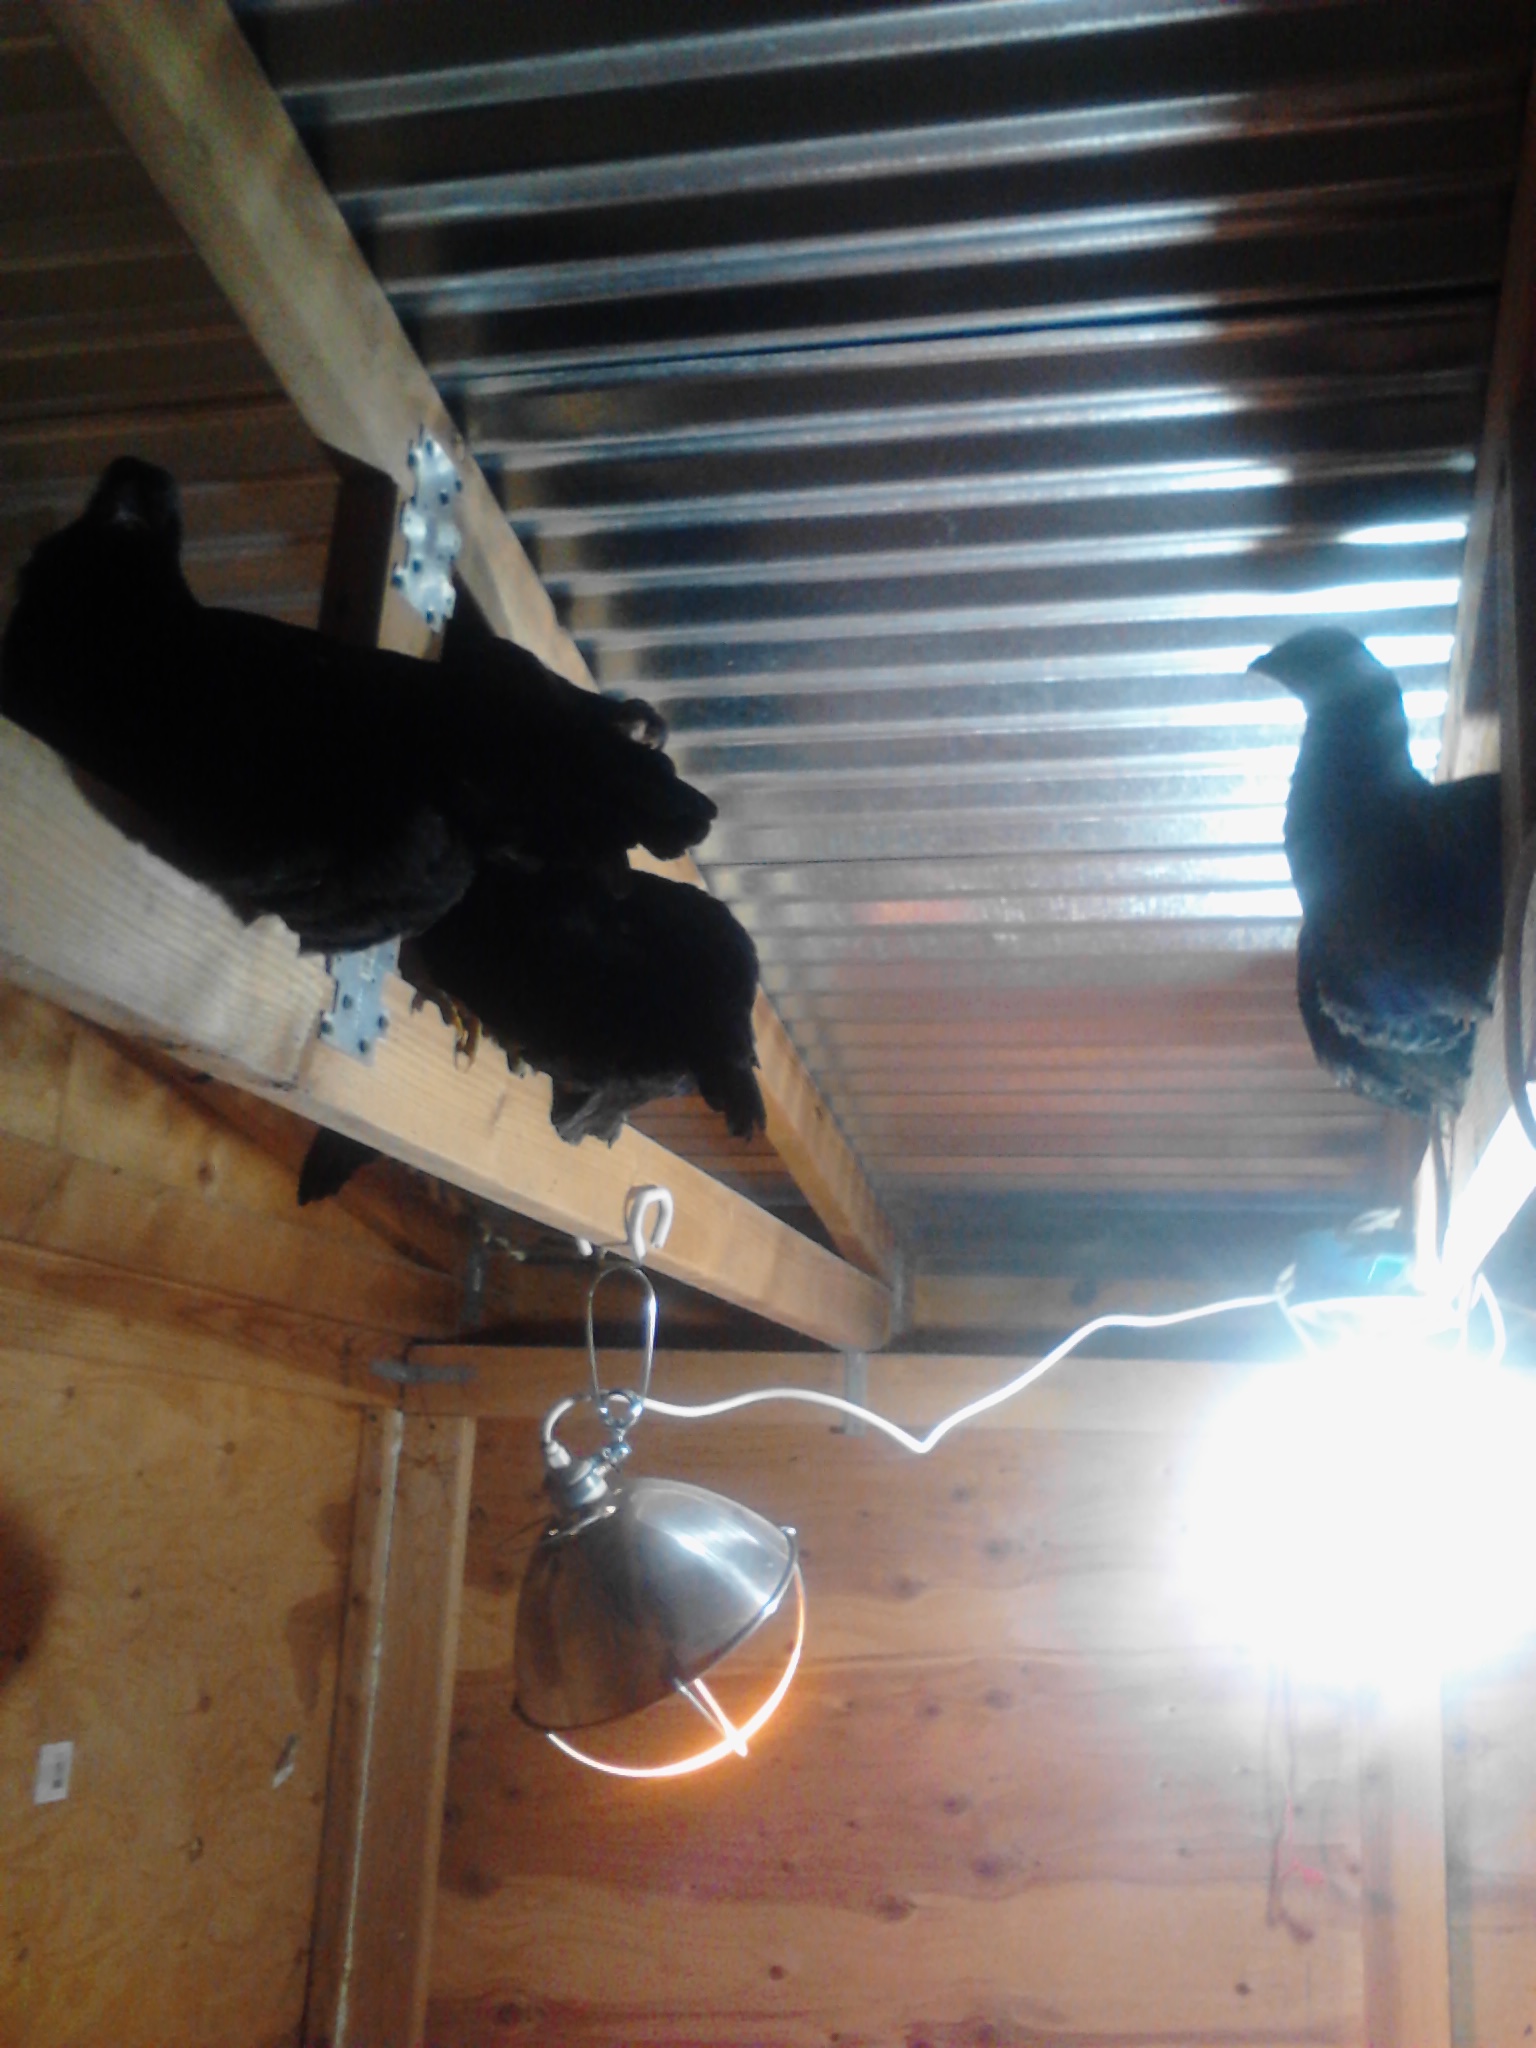 My new ladies I have roosts but they have decided getting into the ceiling is best